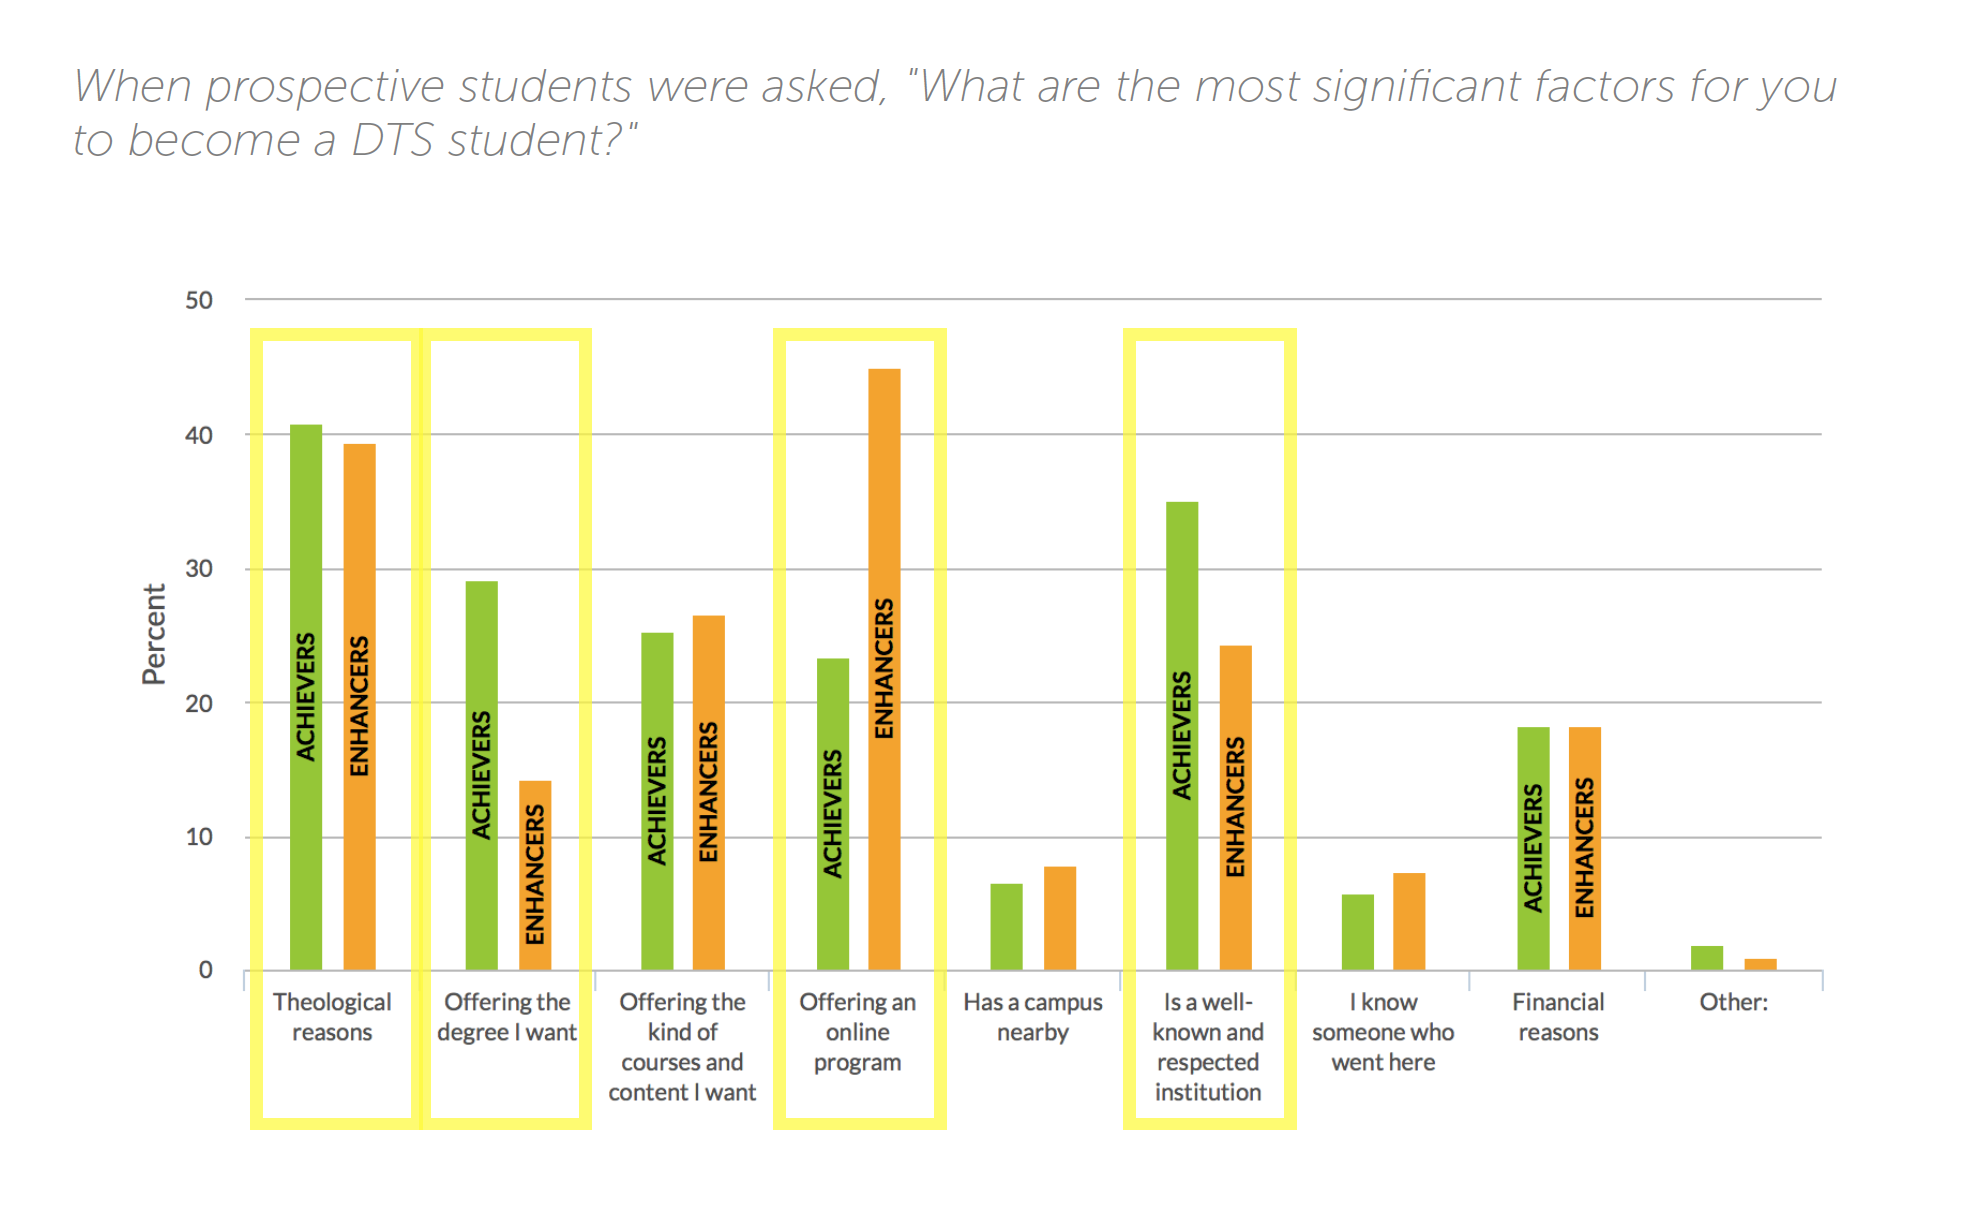 A chart from a prospective DTS student survey, showing the most significant factors for them to become DTS students.